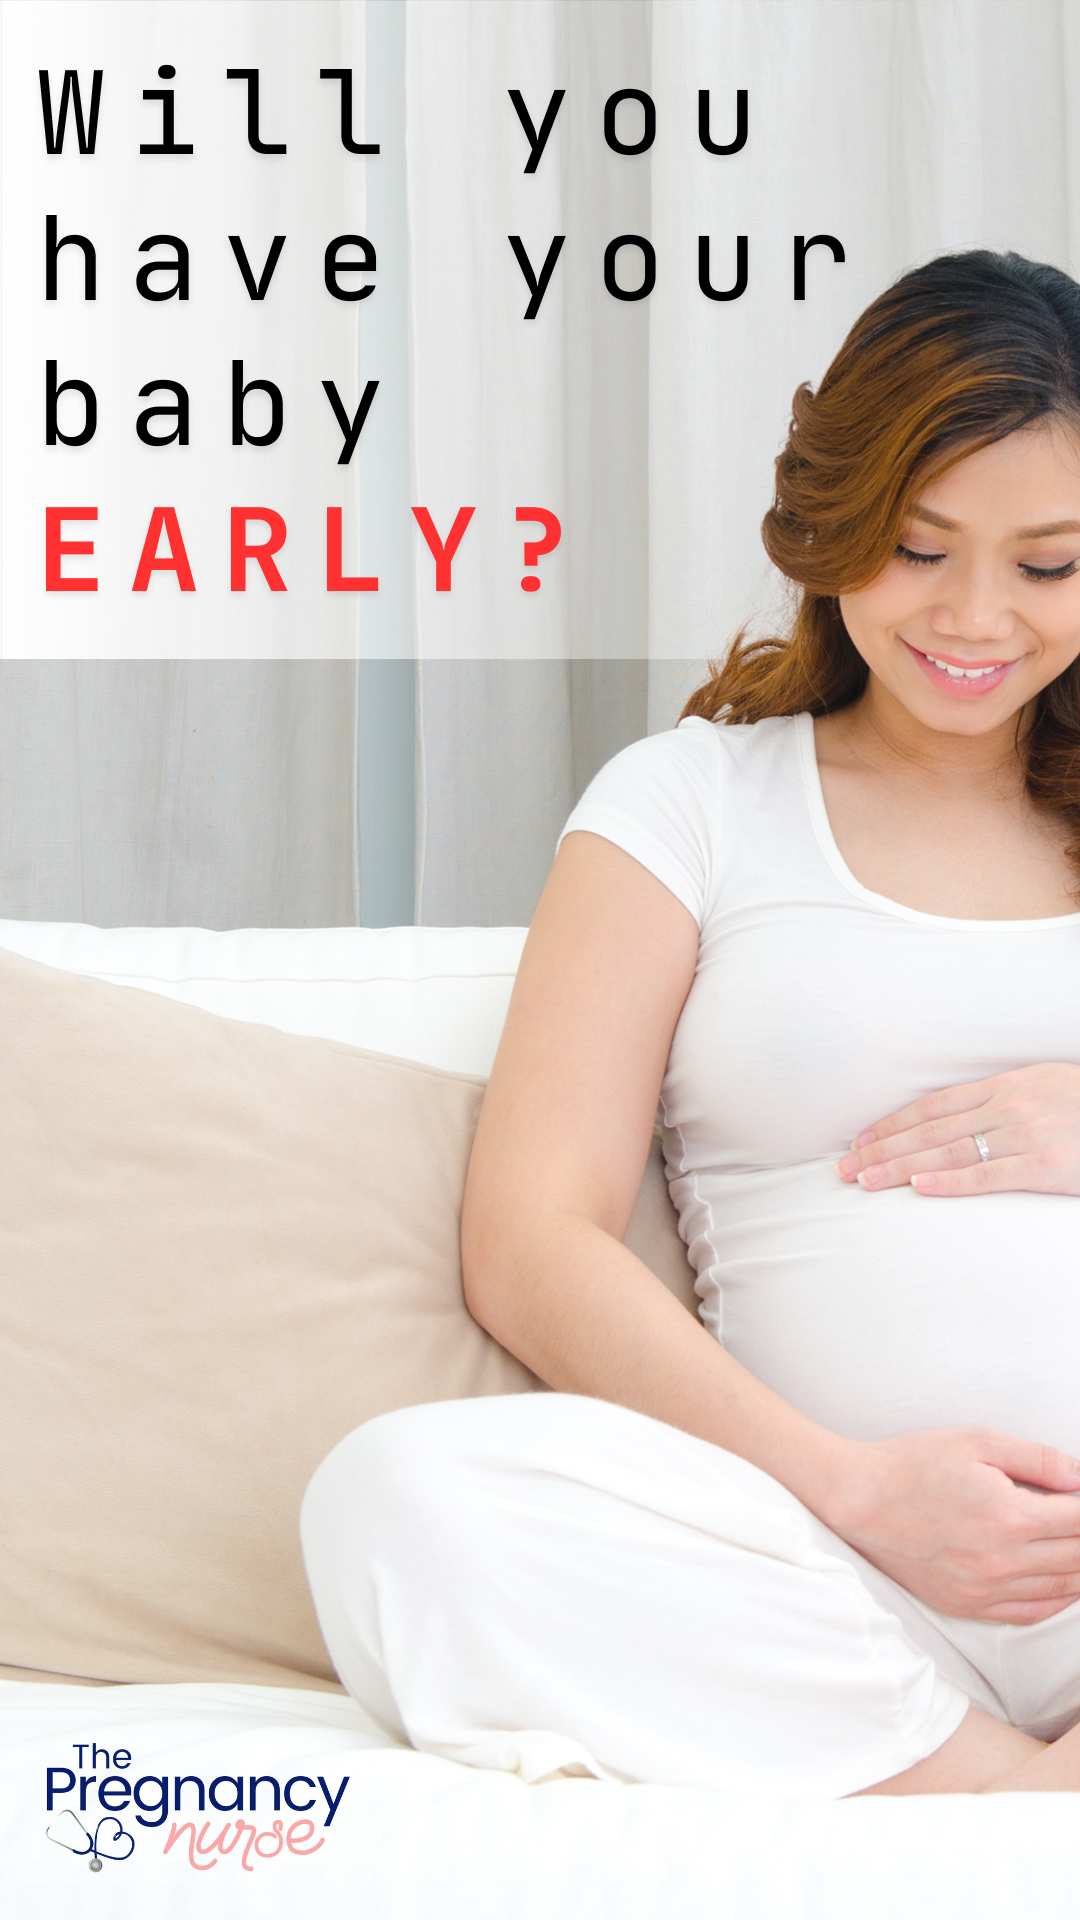 Ever pondered over the accuracy of due dates? In this pin, we take a deep dive into all the science behind due dates, the chances of going into labor early or late, and the role of inductions. No more guesswork, let's base your expectations on proper research and a nurse's two decades of experience!